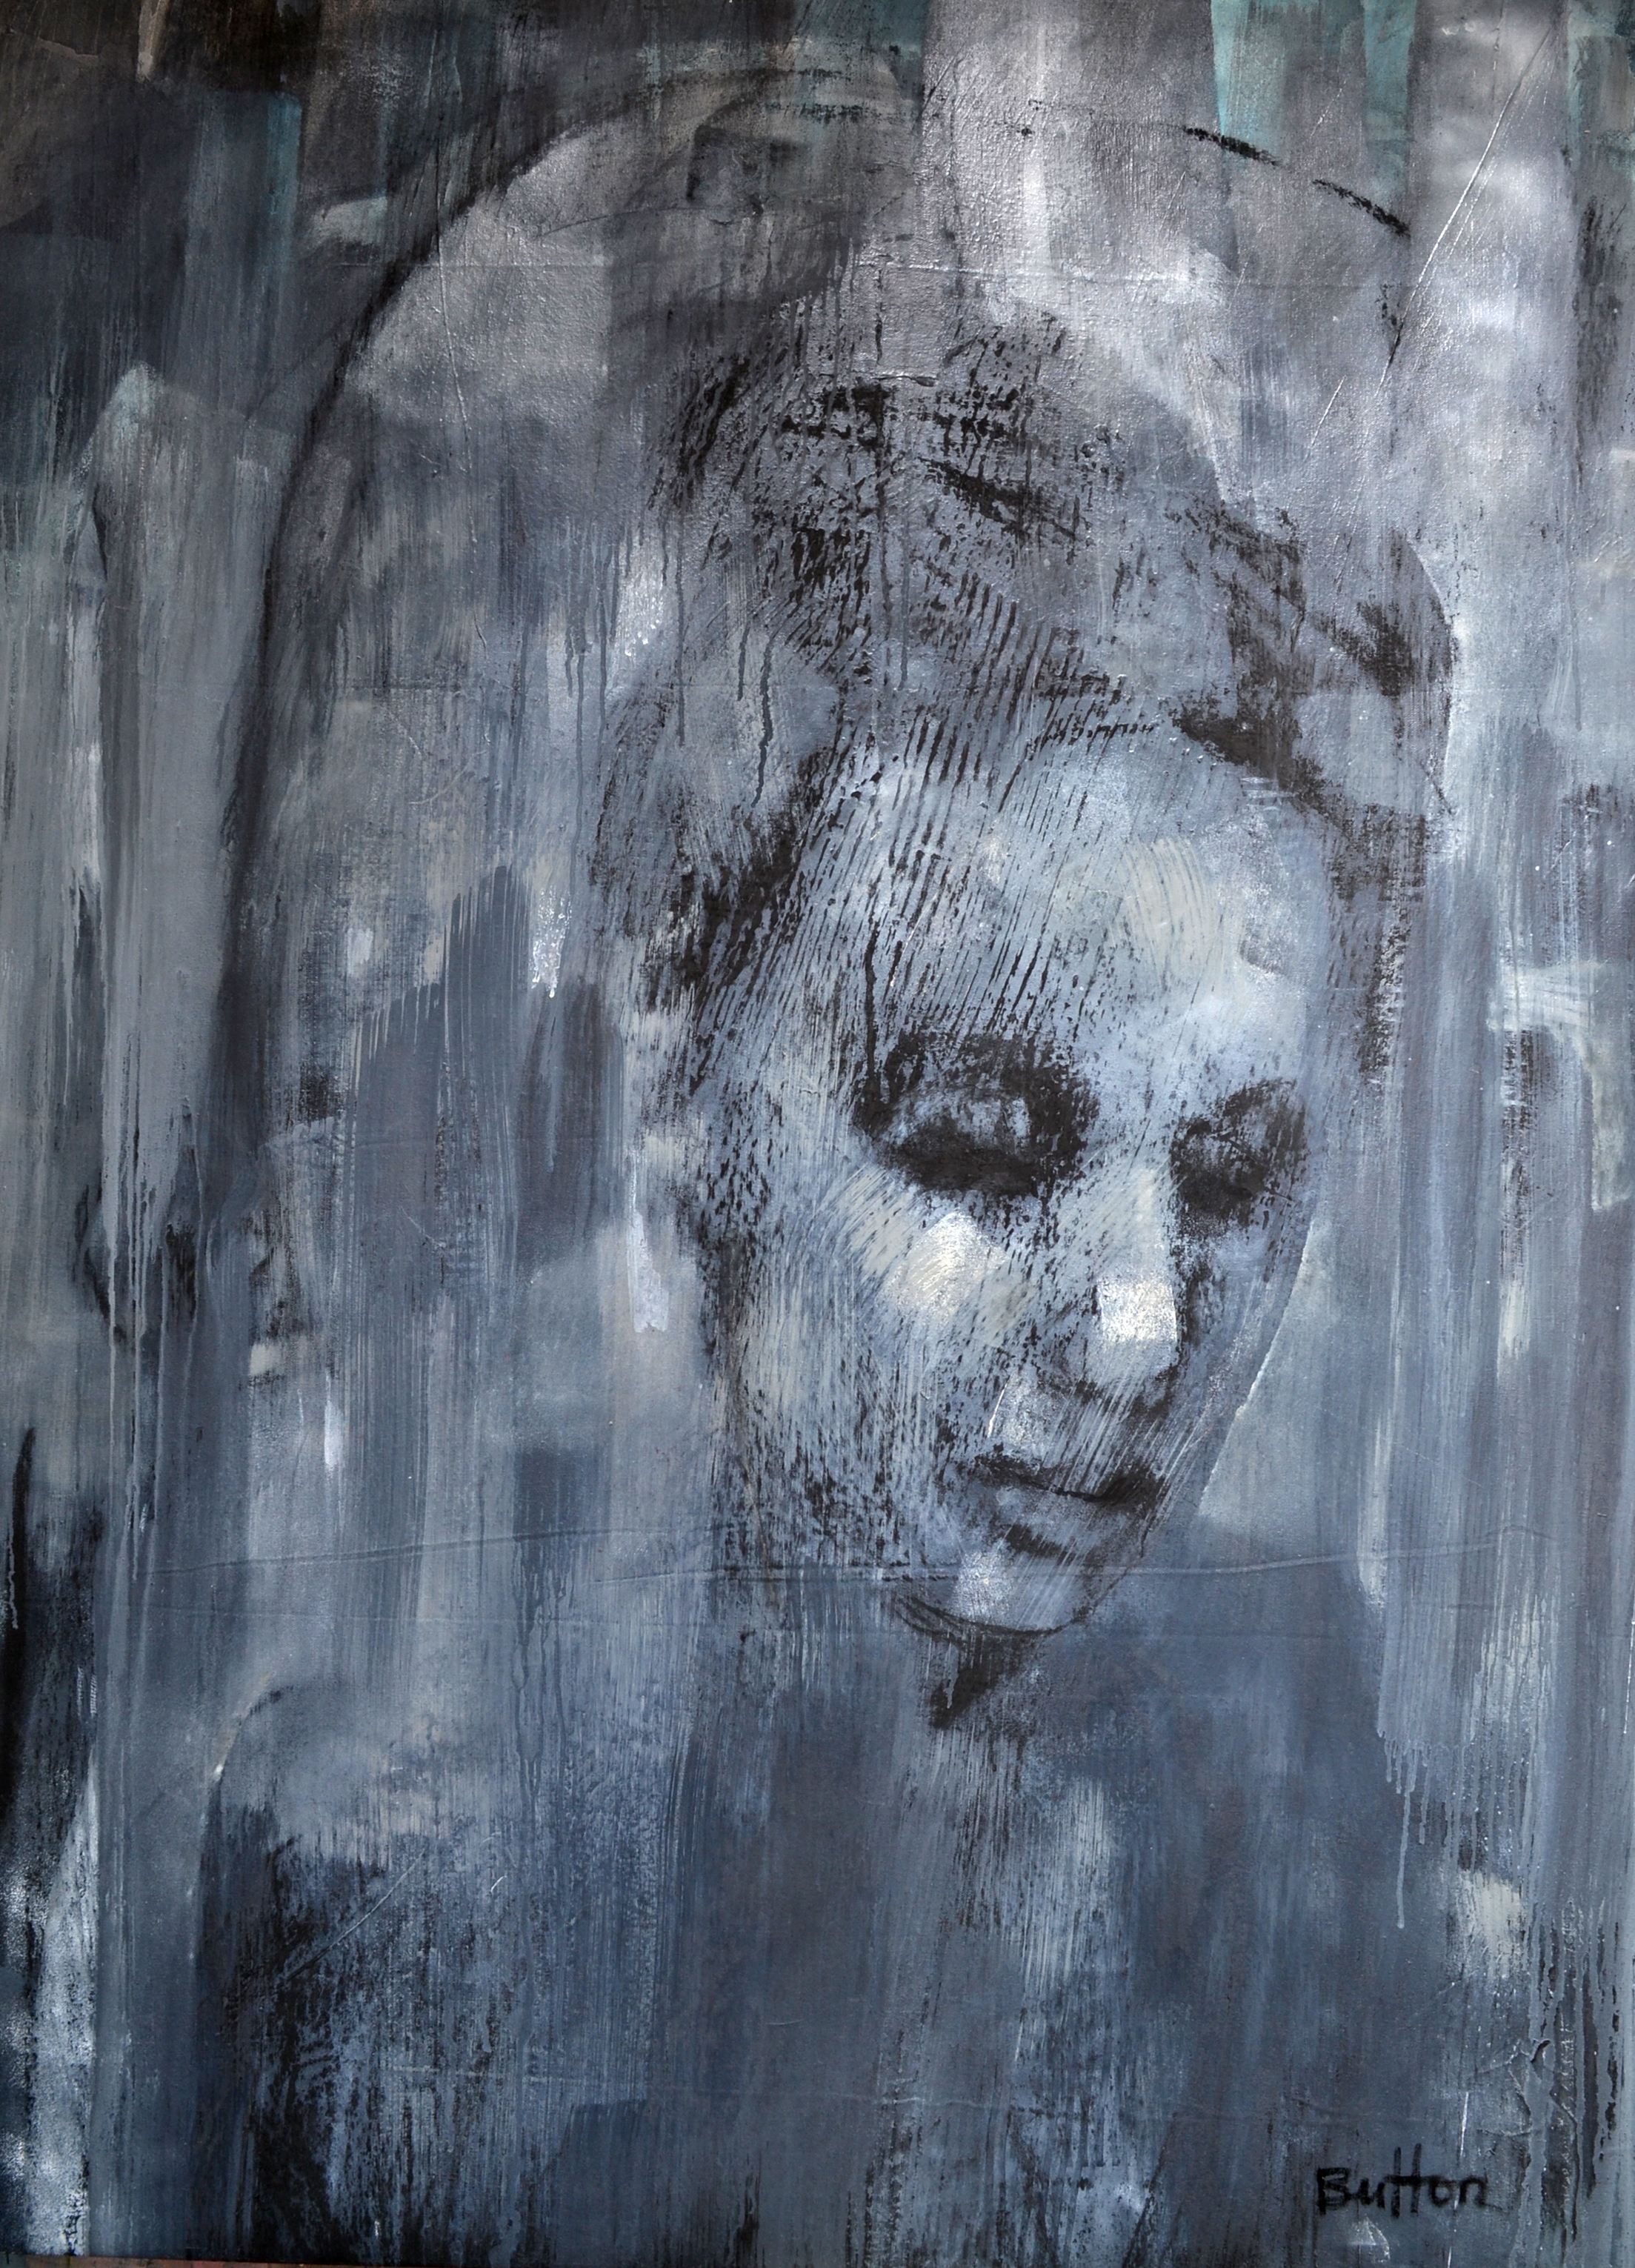  JUST SLIPPING BY £4750 Acrylic, graphite, charcoal,oil, canvas 72 x 52 ins (182.88 x 132.08 cms) 